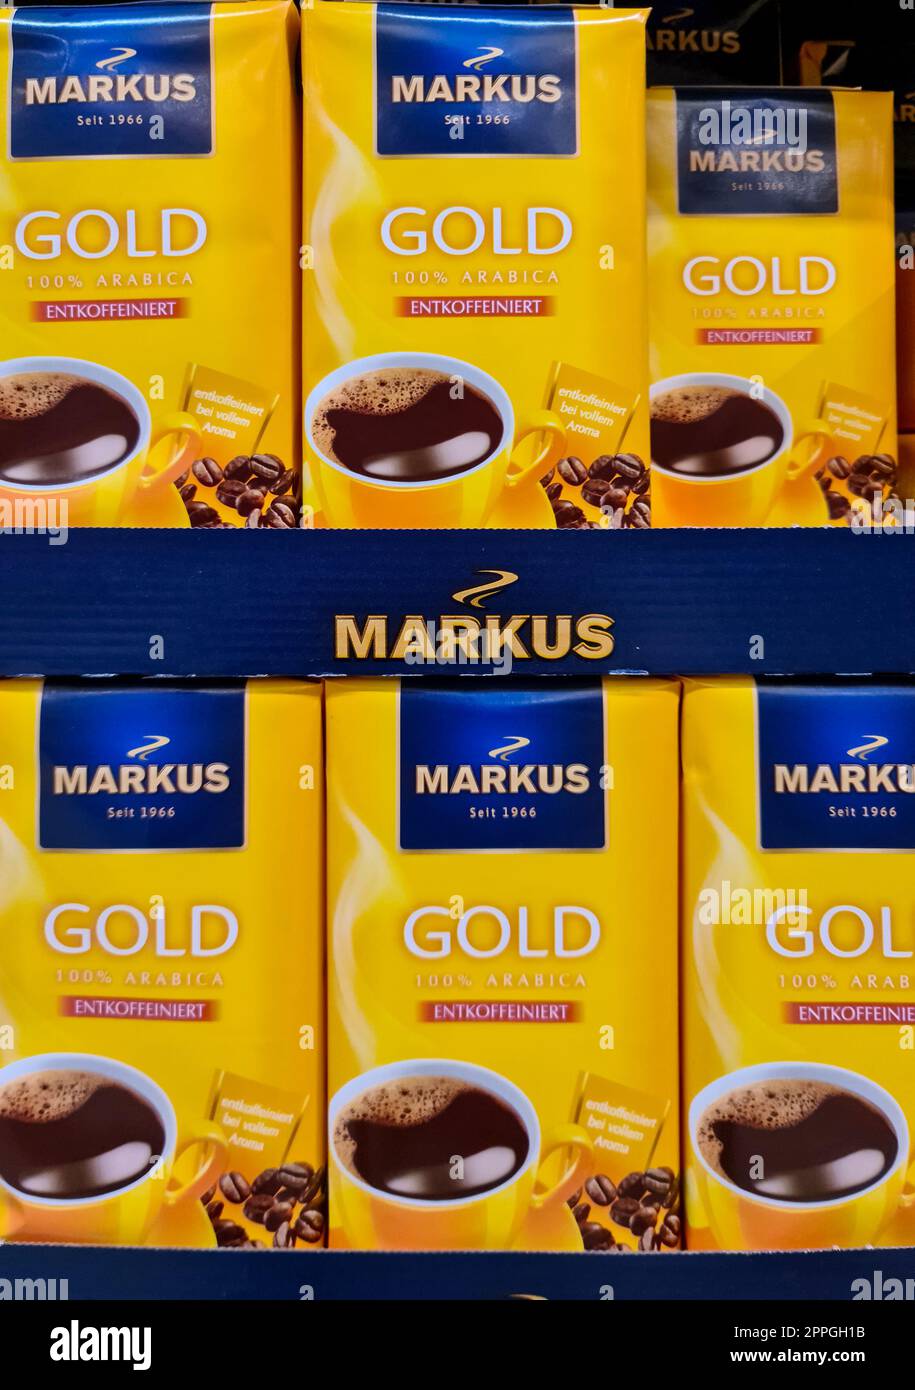 Kiel,Germany - 20 August 2022: Numerous packages of Markus brand coffee on a supermarket shelf. Stock Photo